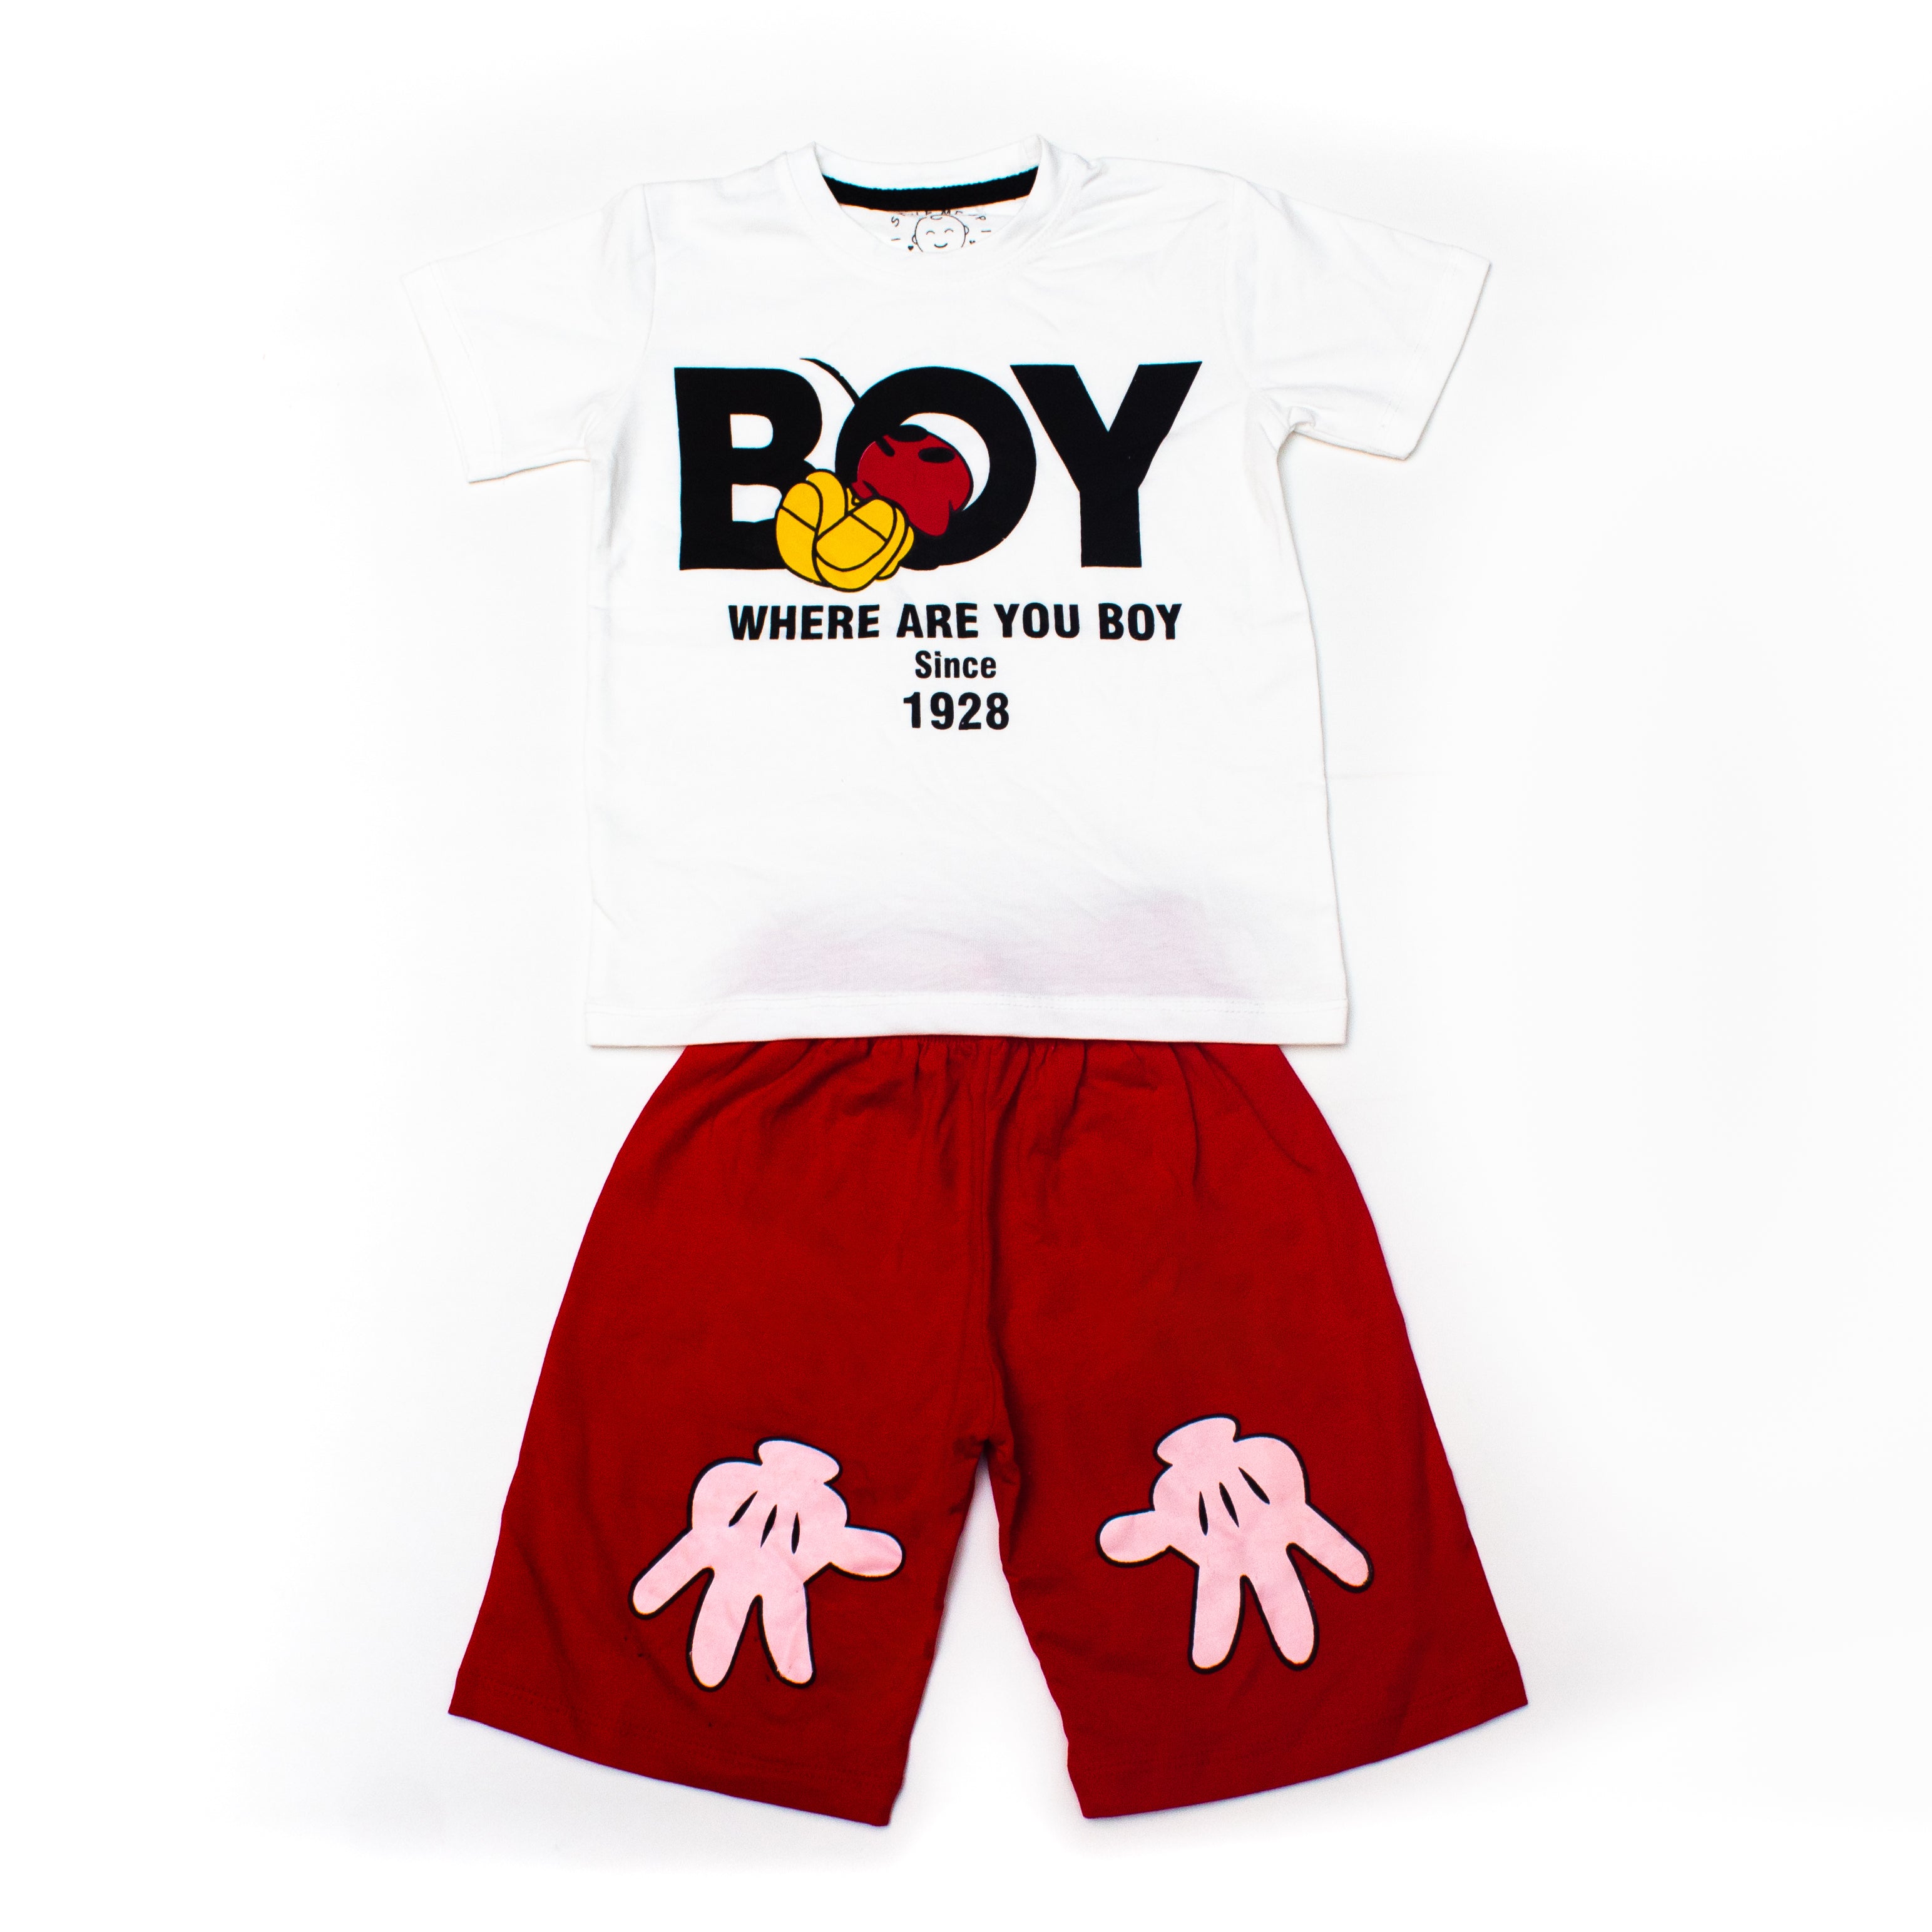 BOY T-Shirt And Shorts For Kids